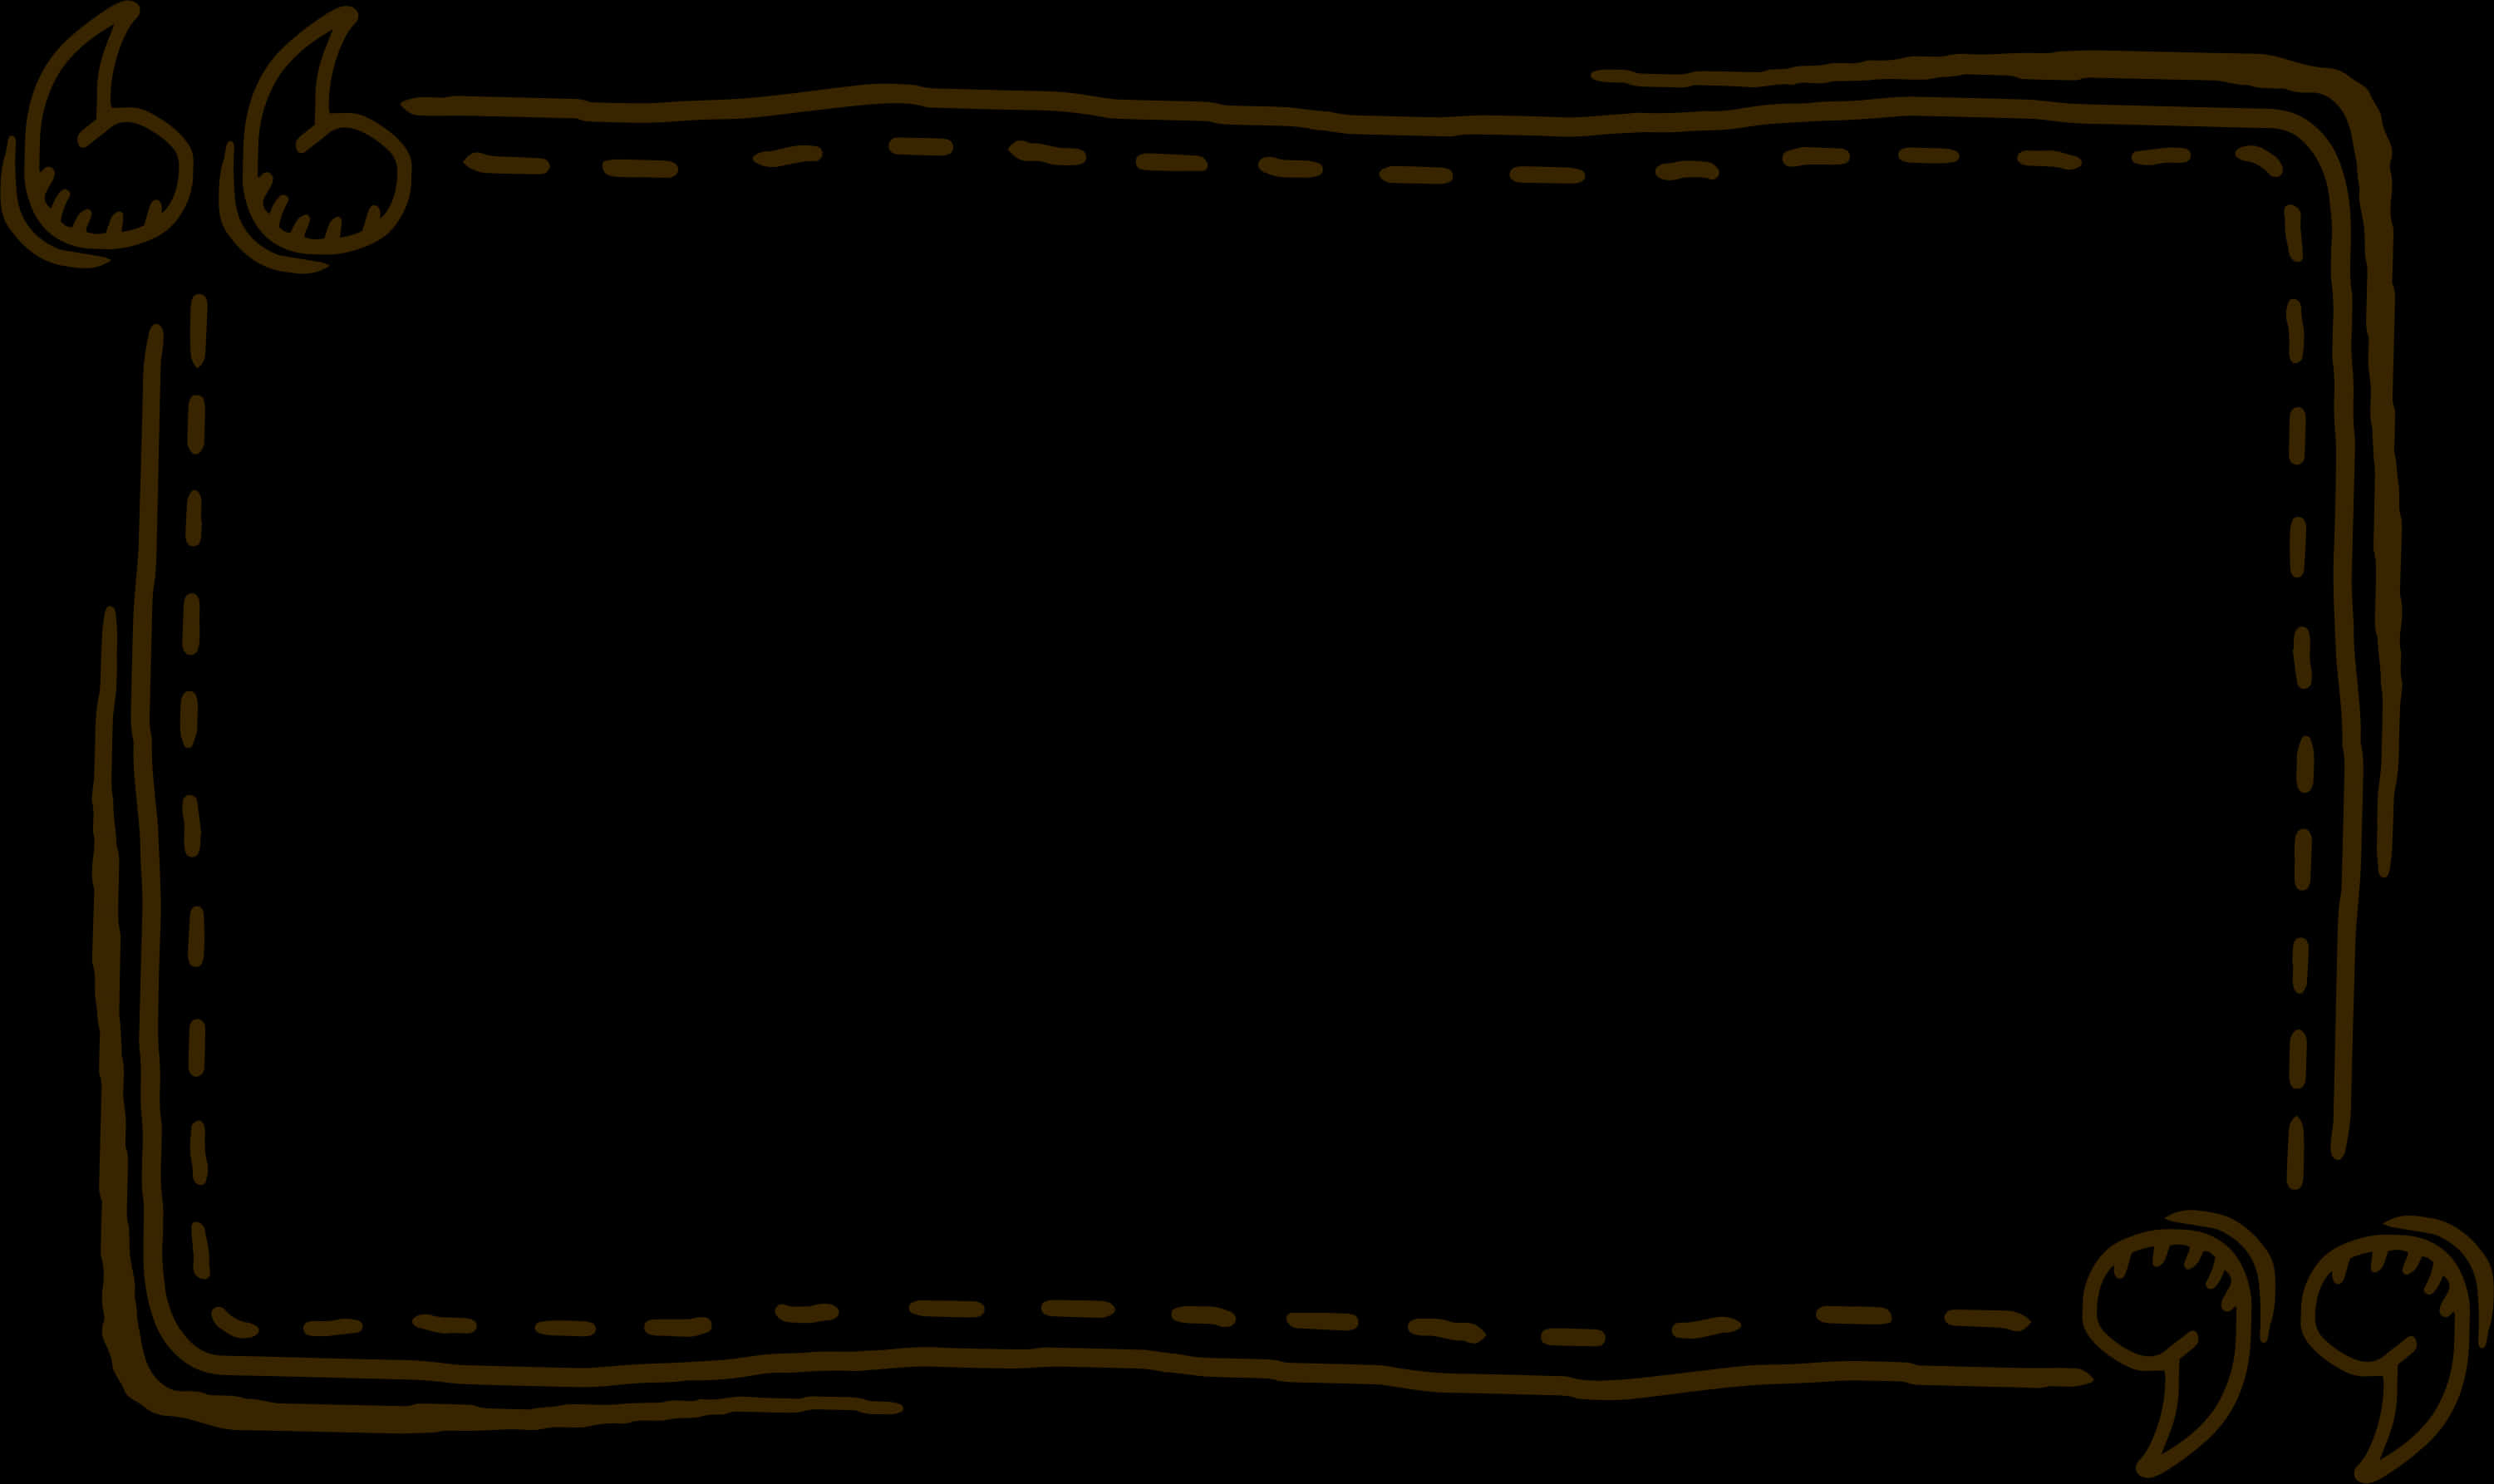 A Black Rectangle With Brown Lines On It